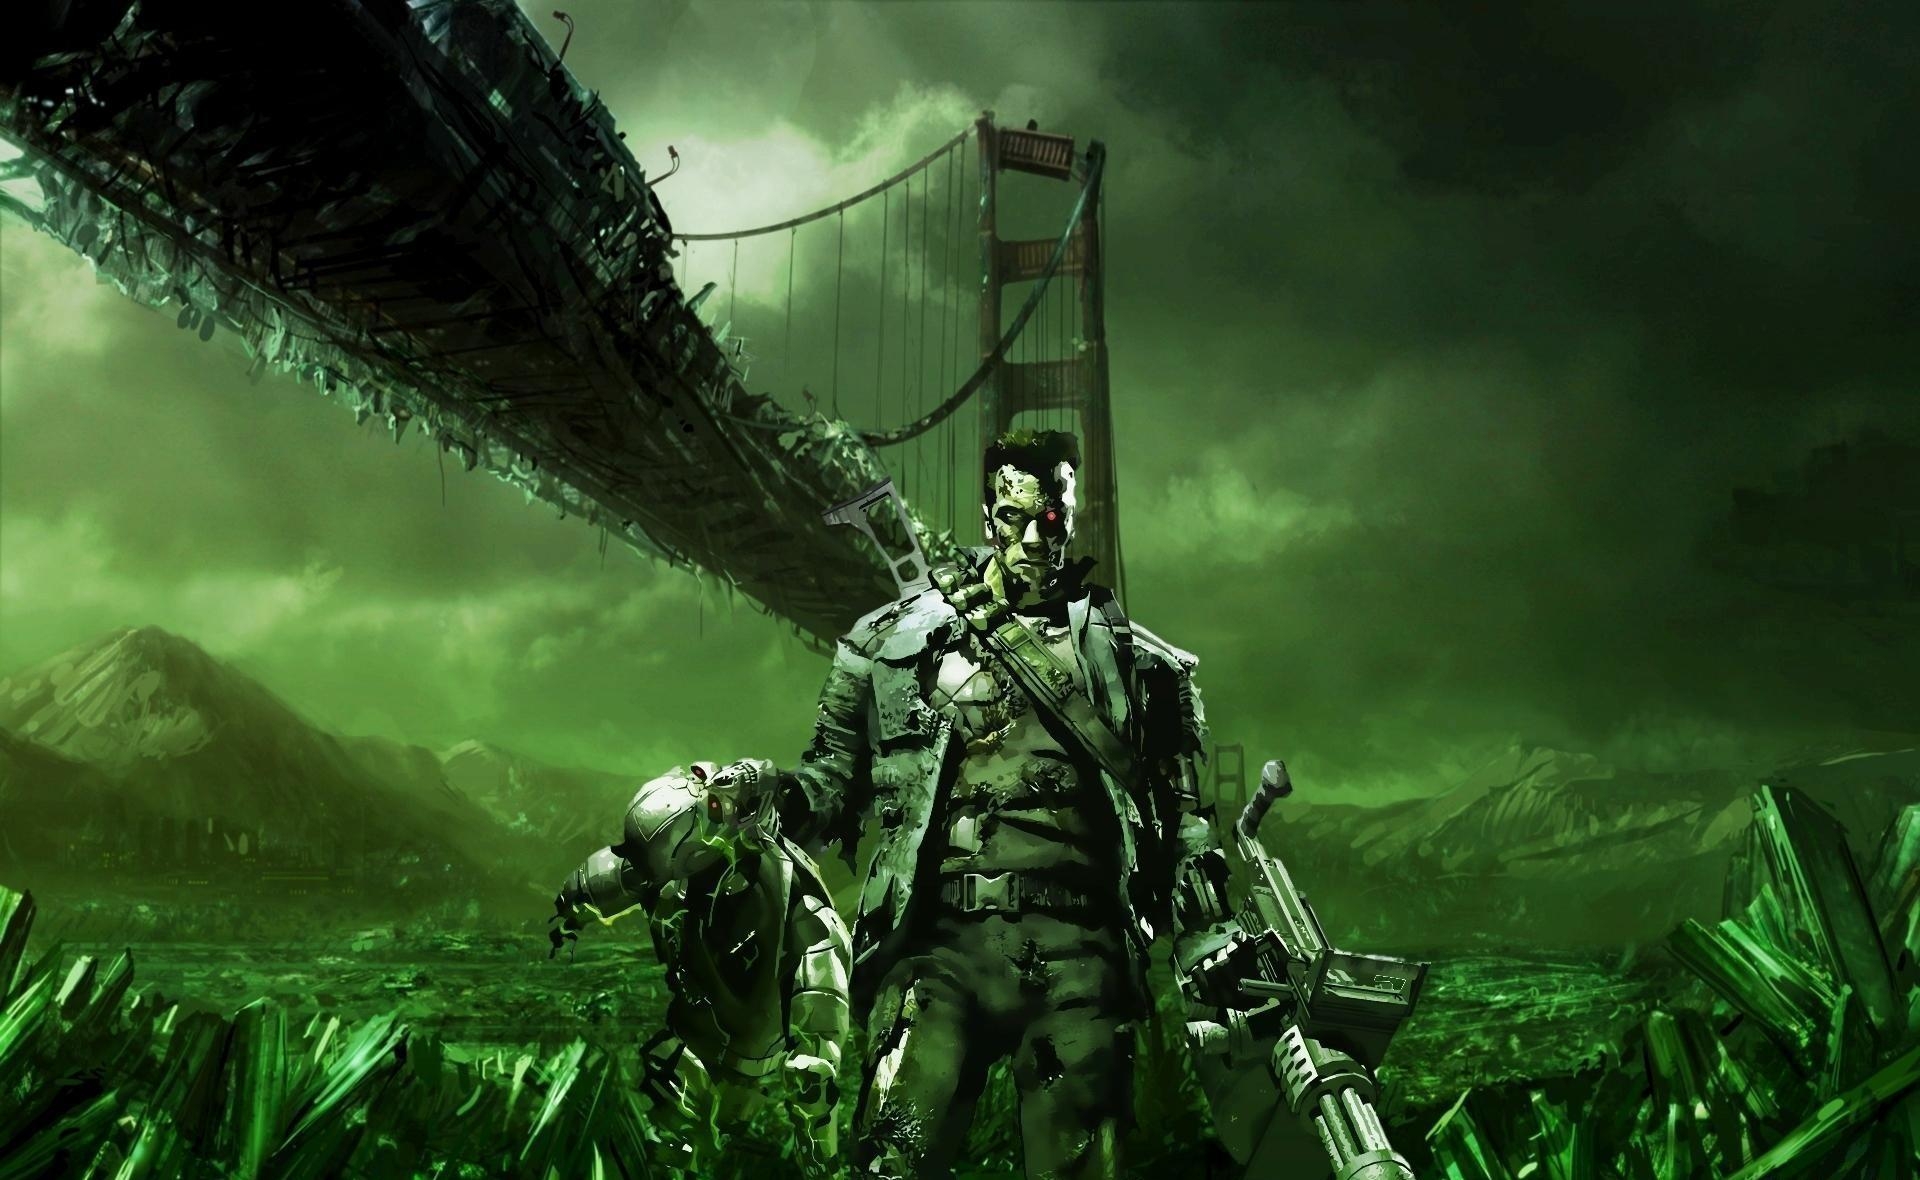 565751 1920x1080 terminator : High Definition Background JPG 456 kB - Rare  Gallery HD Wallpapers